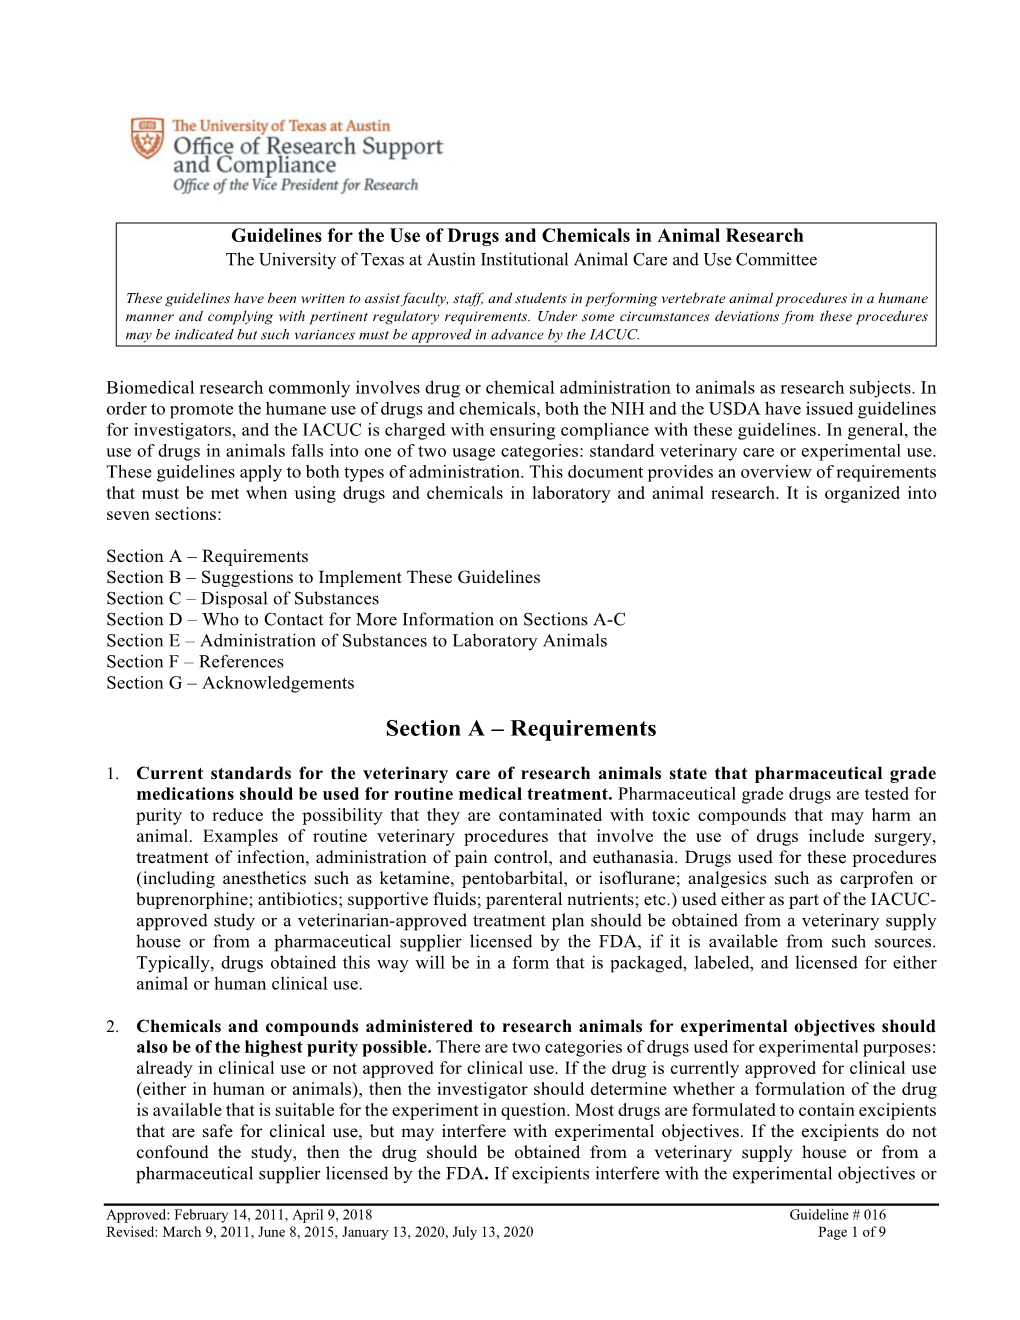 Guidelines for the Use of Drugs and Chemicals in Animal Research the University of Texas at Austin Institutional Animal Care and Use Committee